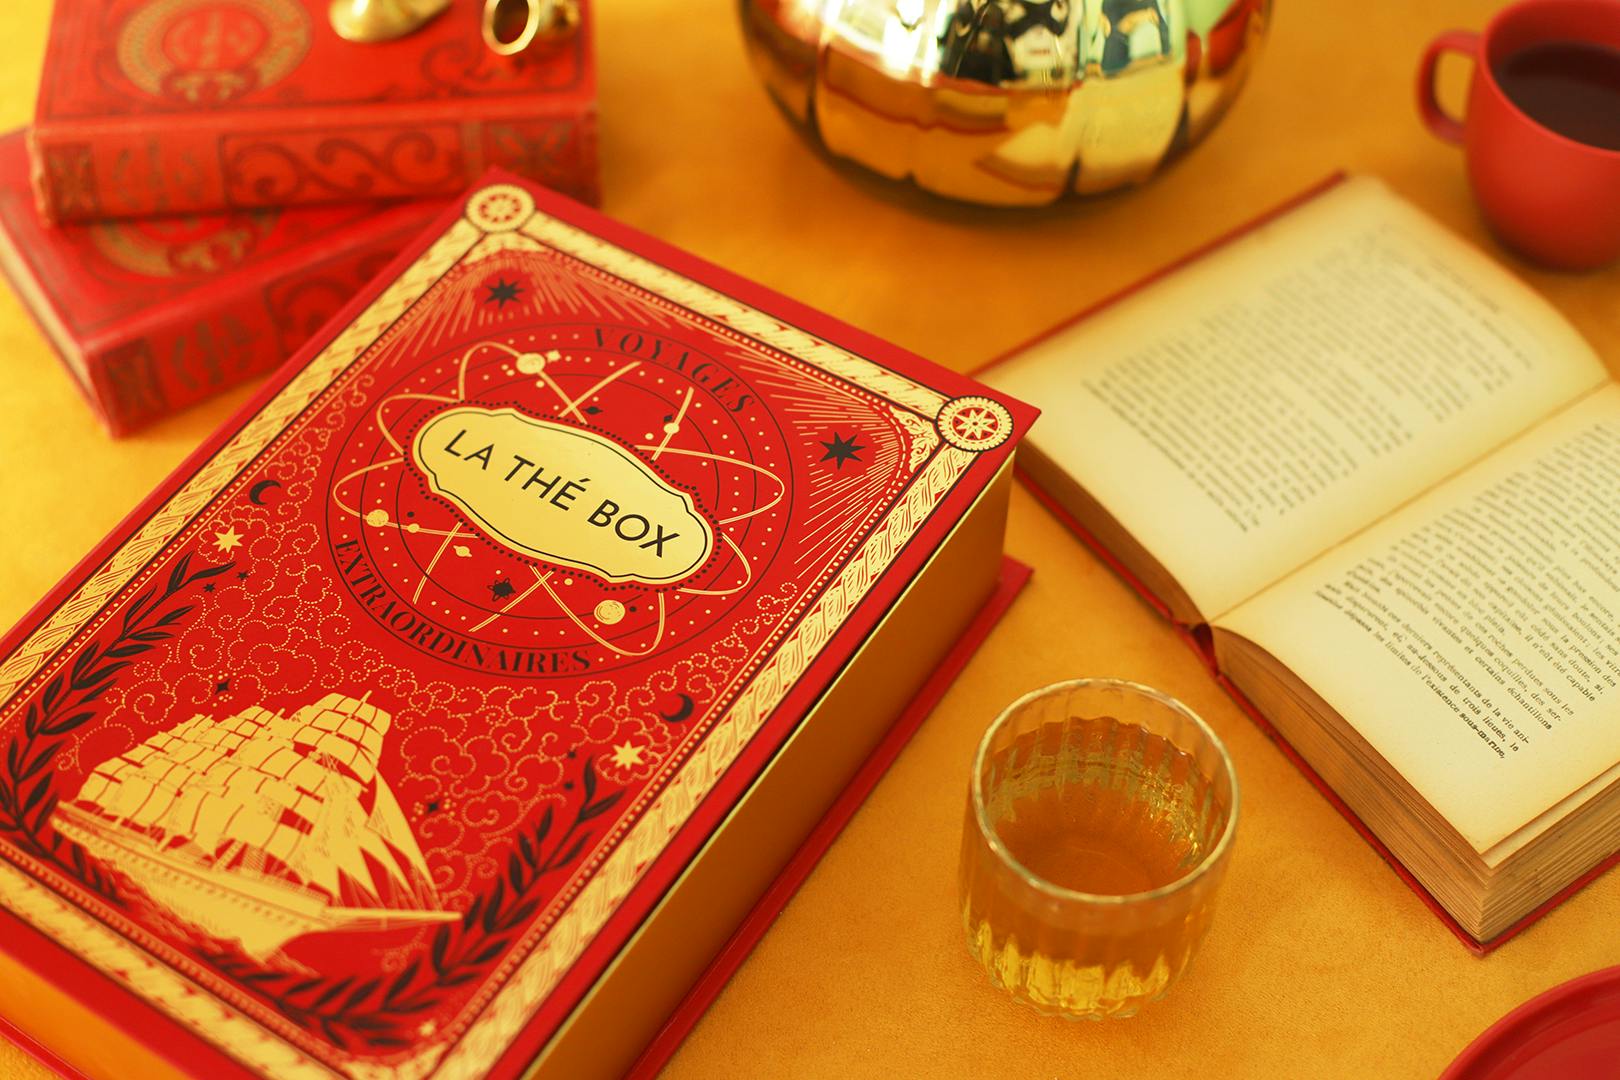 Red and gold illustrations for the Thébox Jules Verne